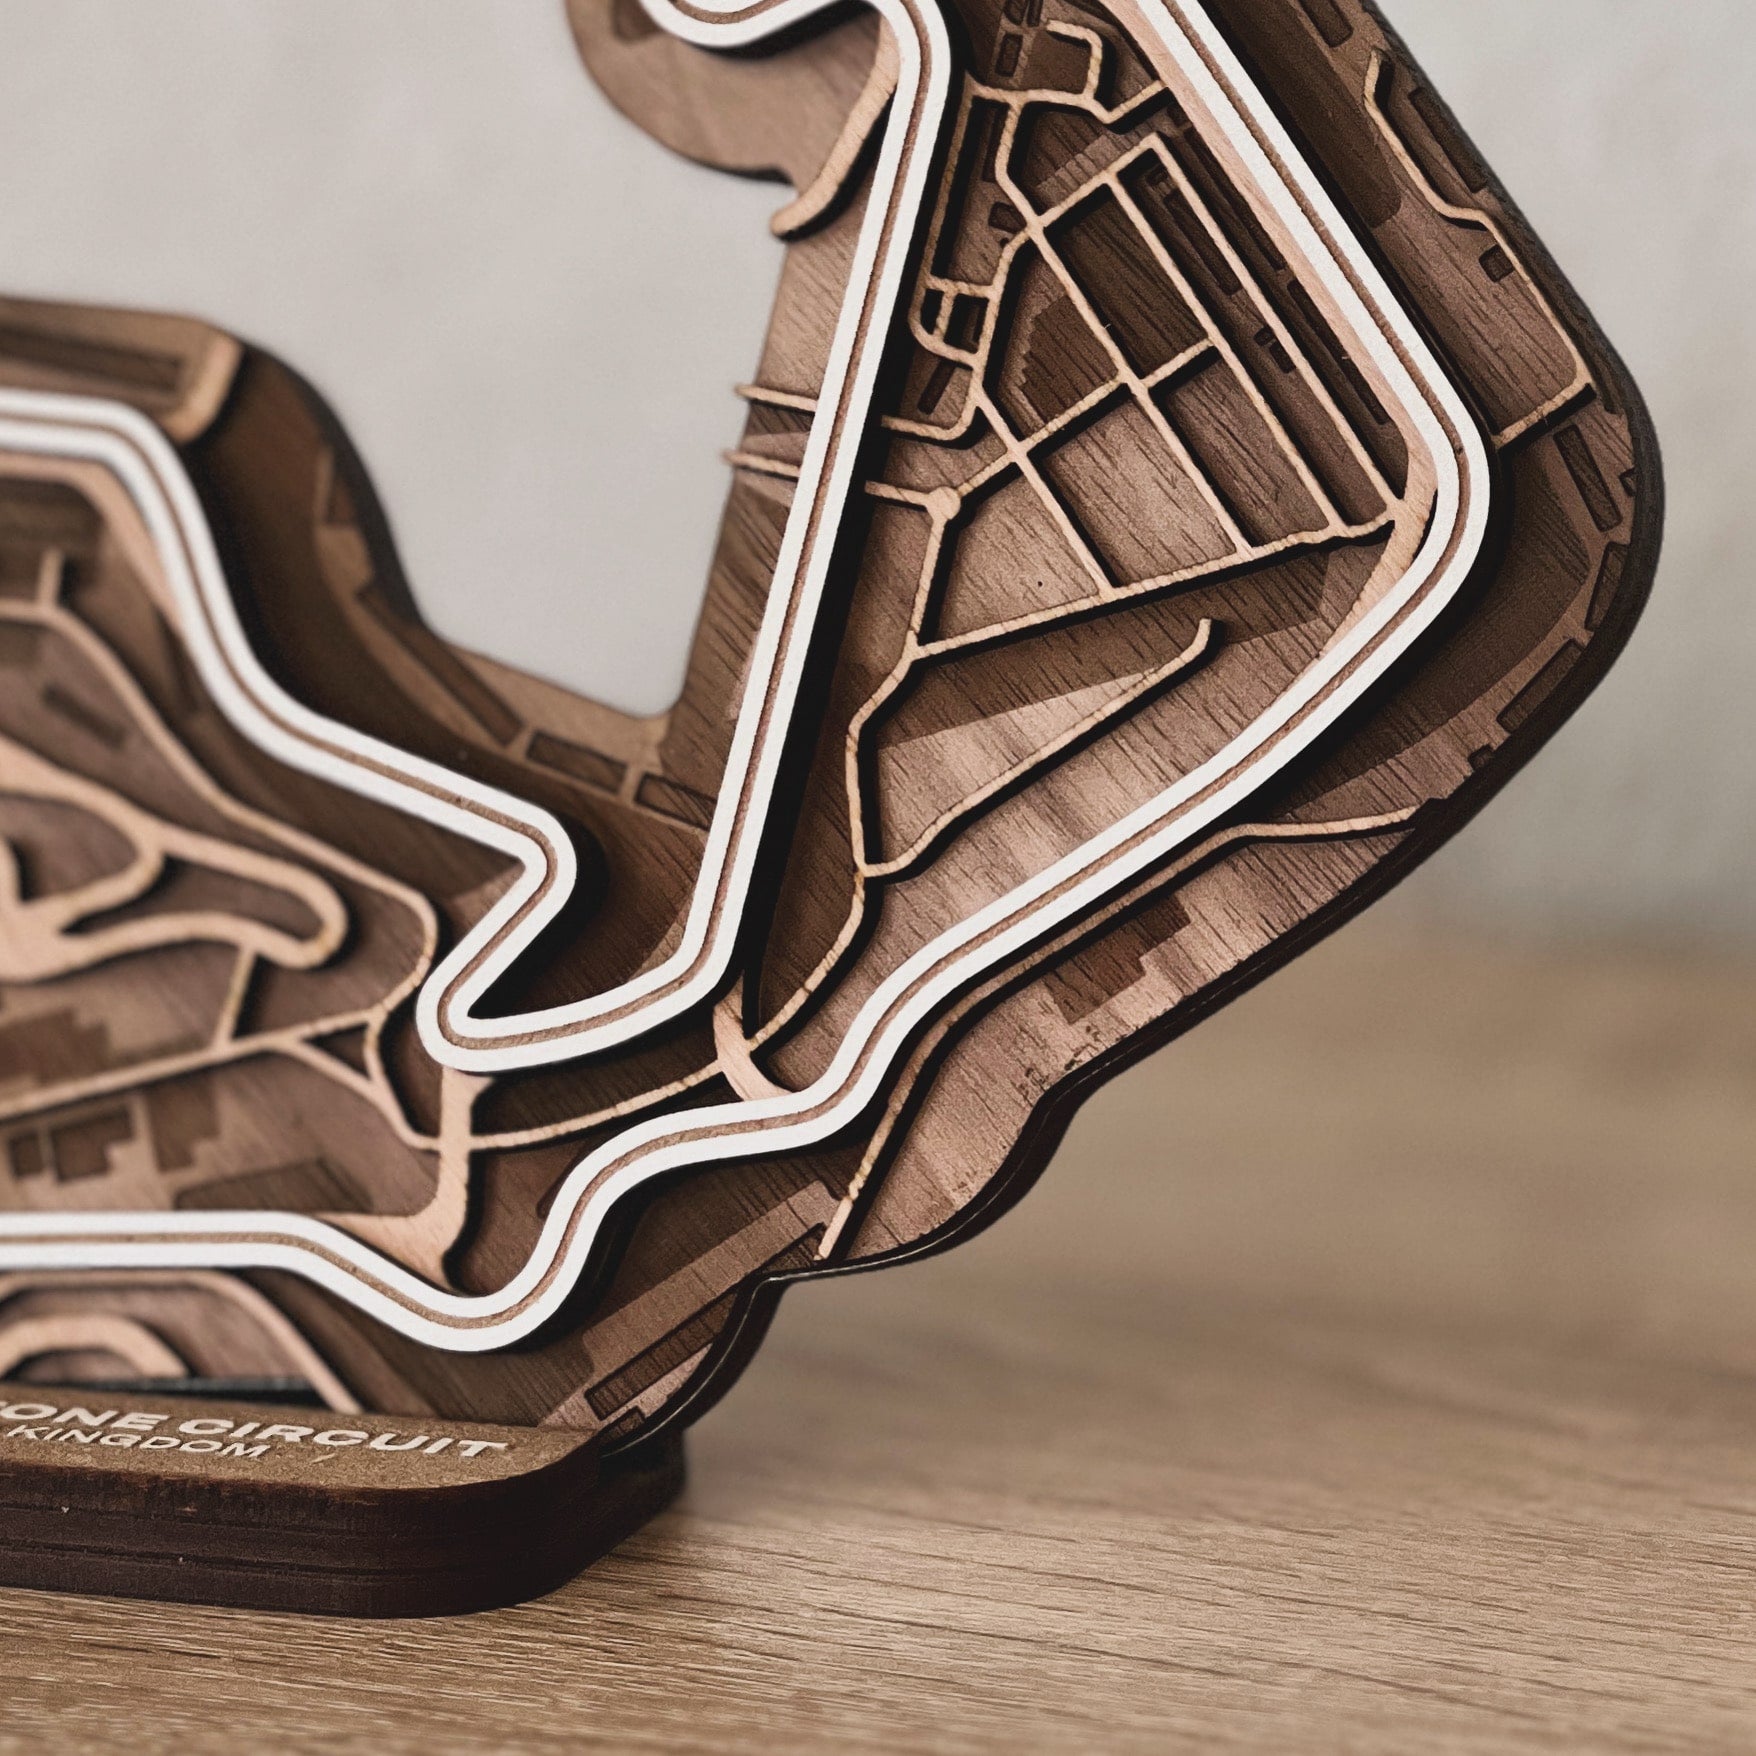 Silverstone Wooden Racetrack Close Up 2